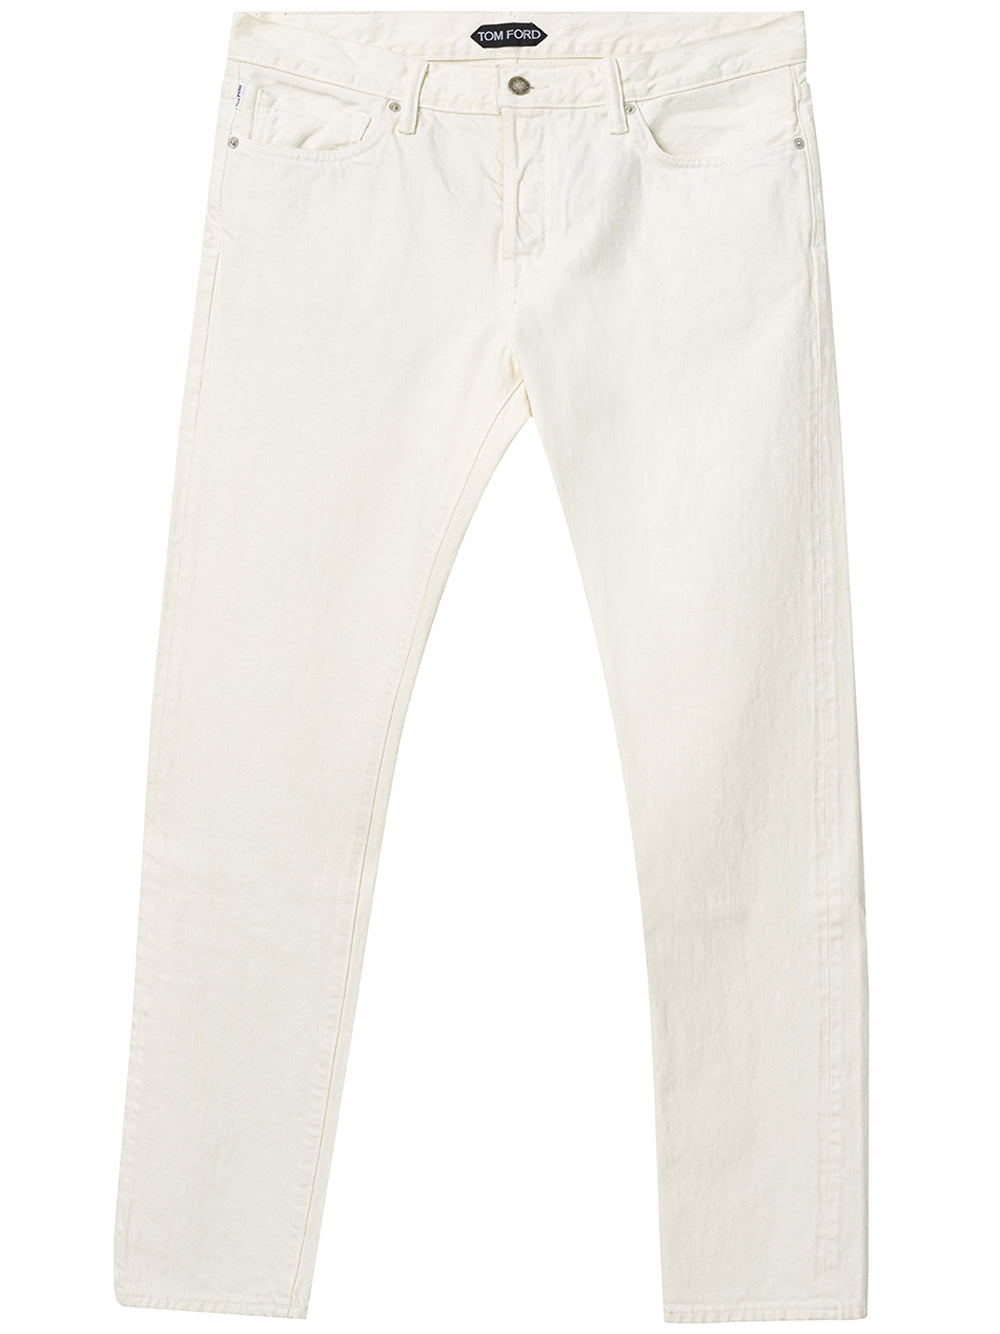 Jeans Bianco Cinque Tasche Tom Ford